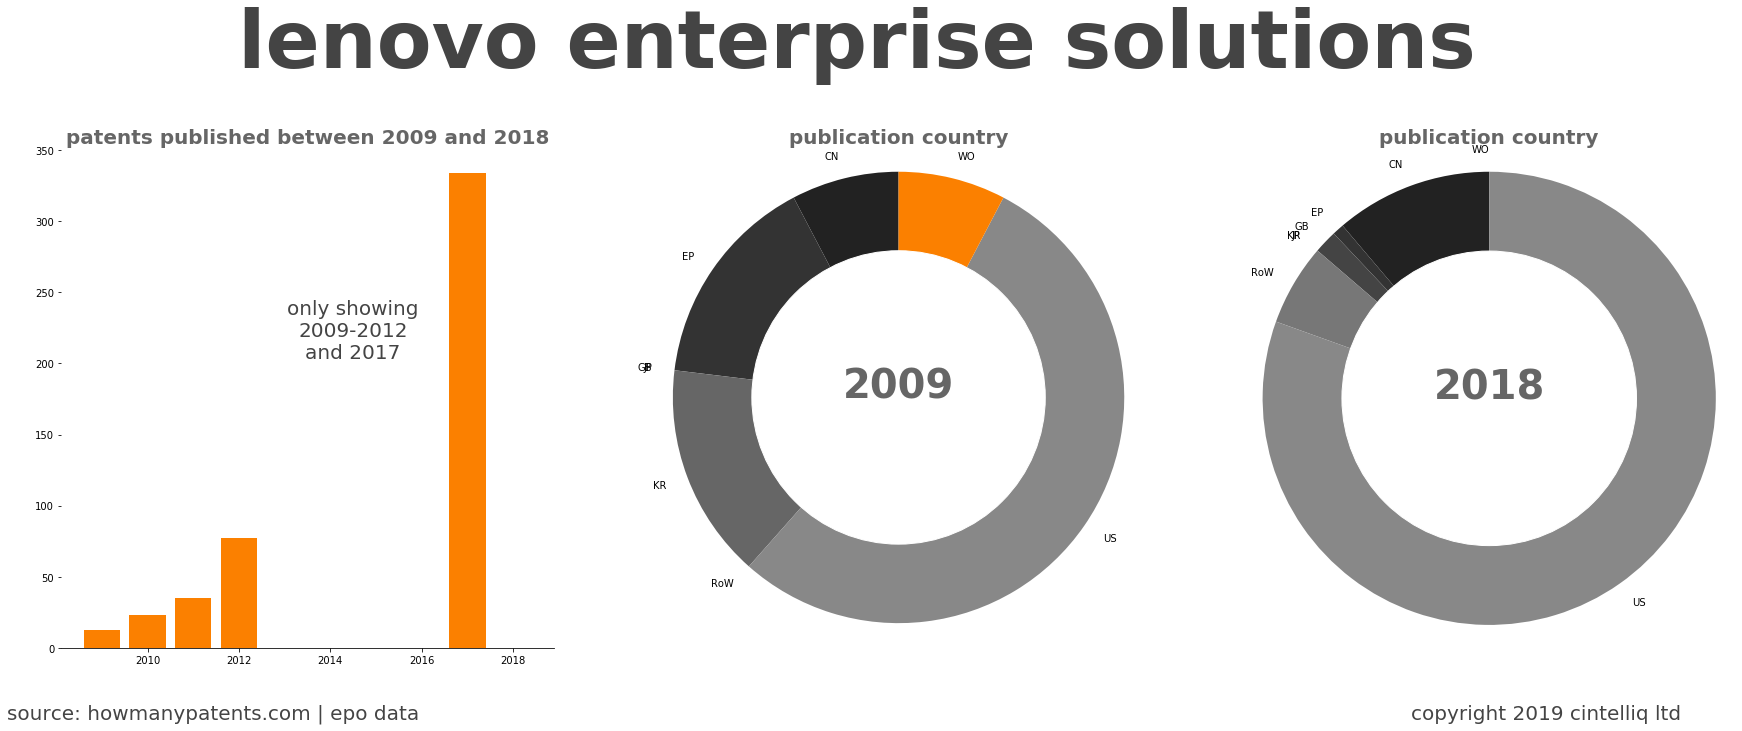 summary of patents for Lenovo Enterprise Solutions 